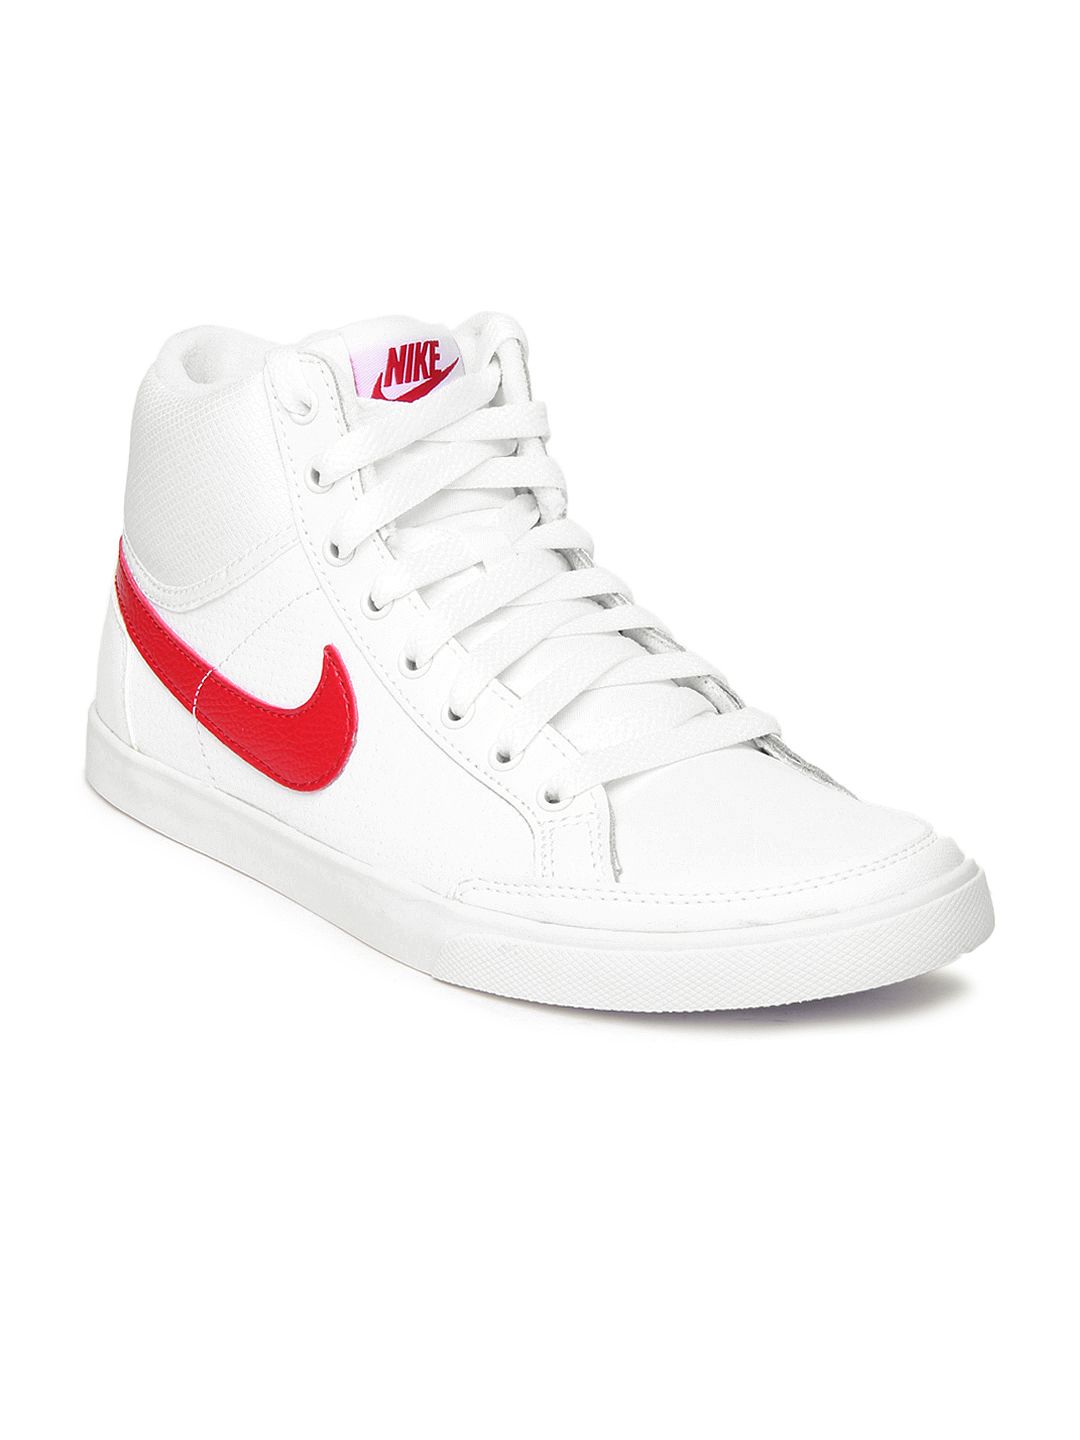 nike casual shoes india